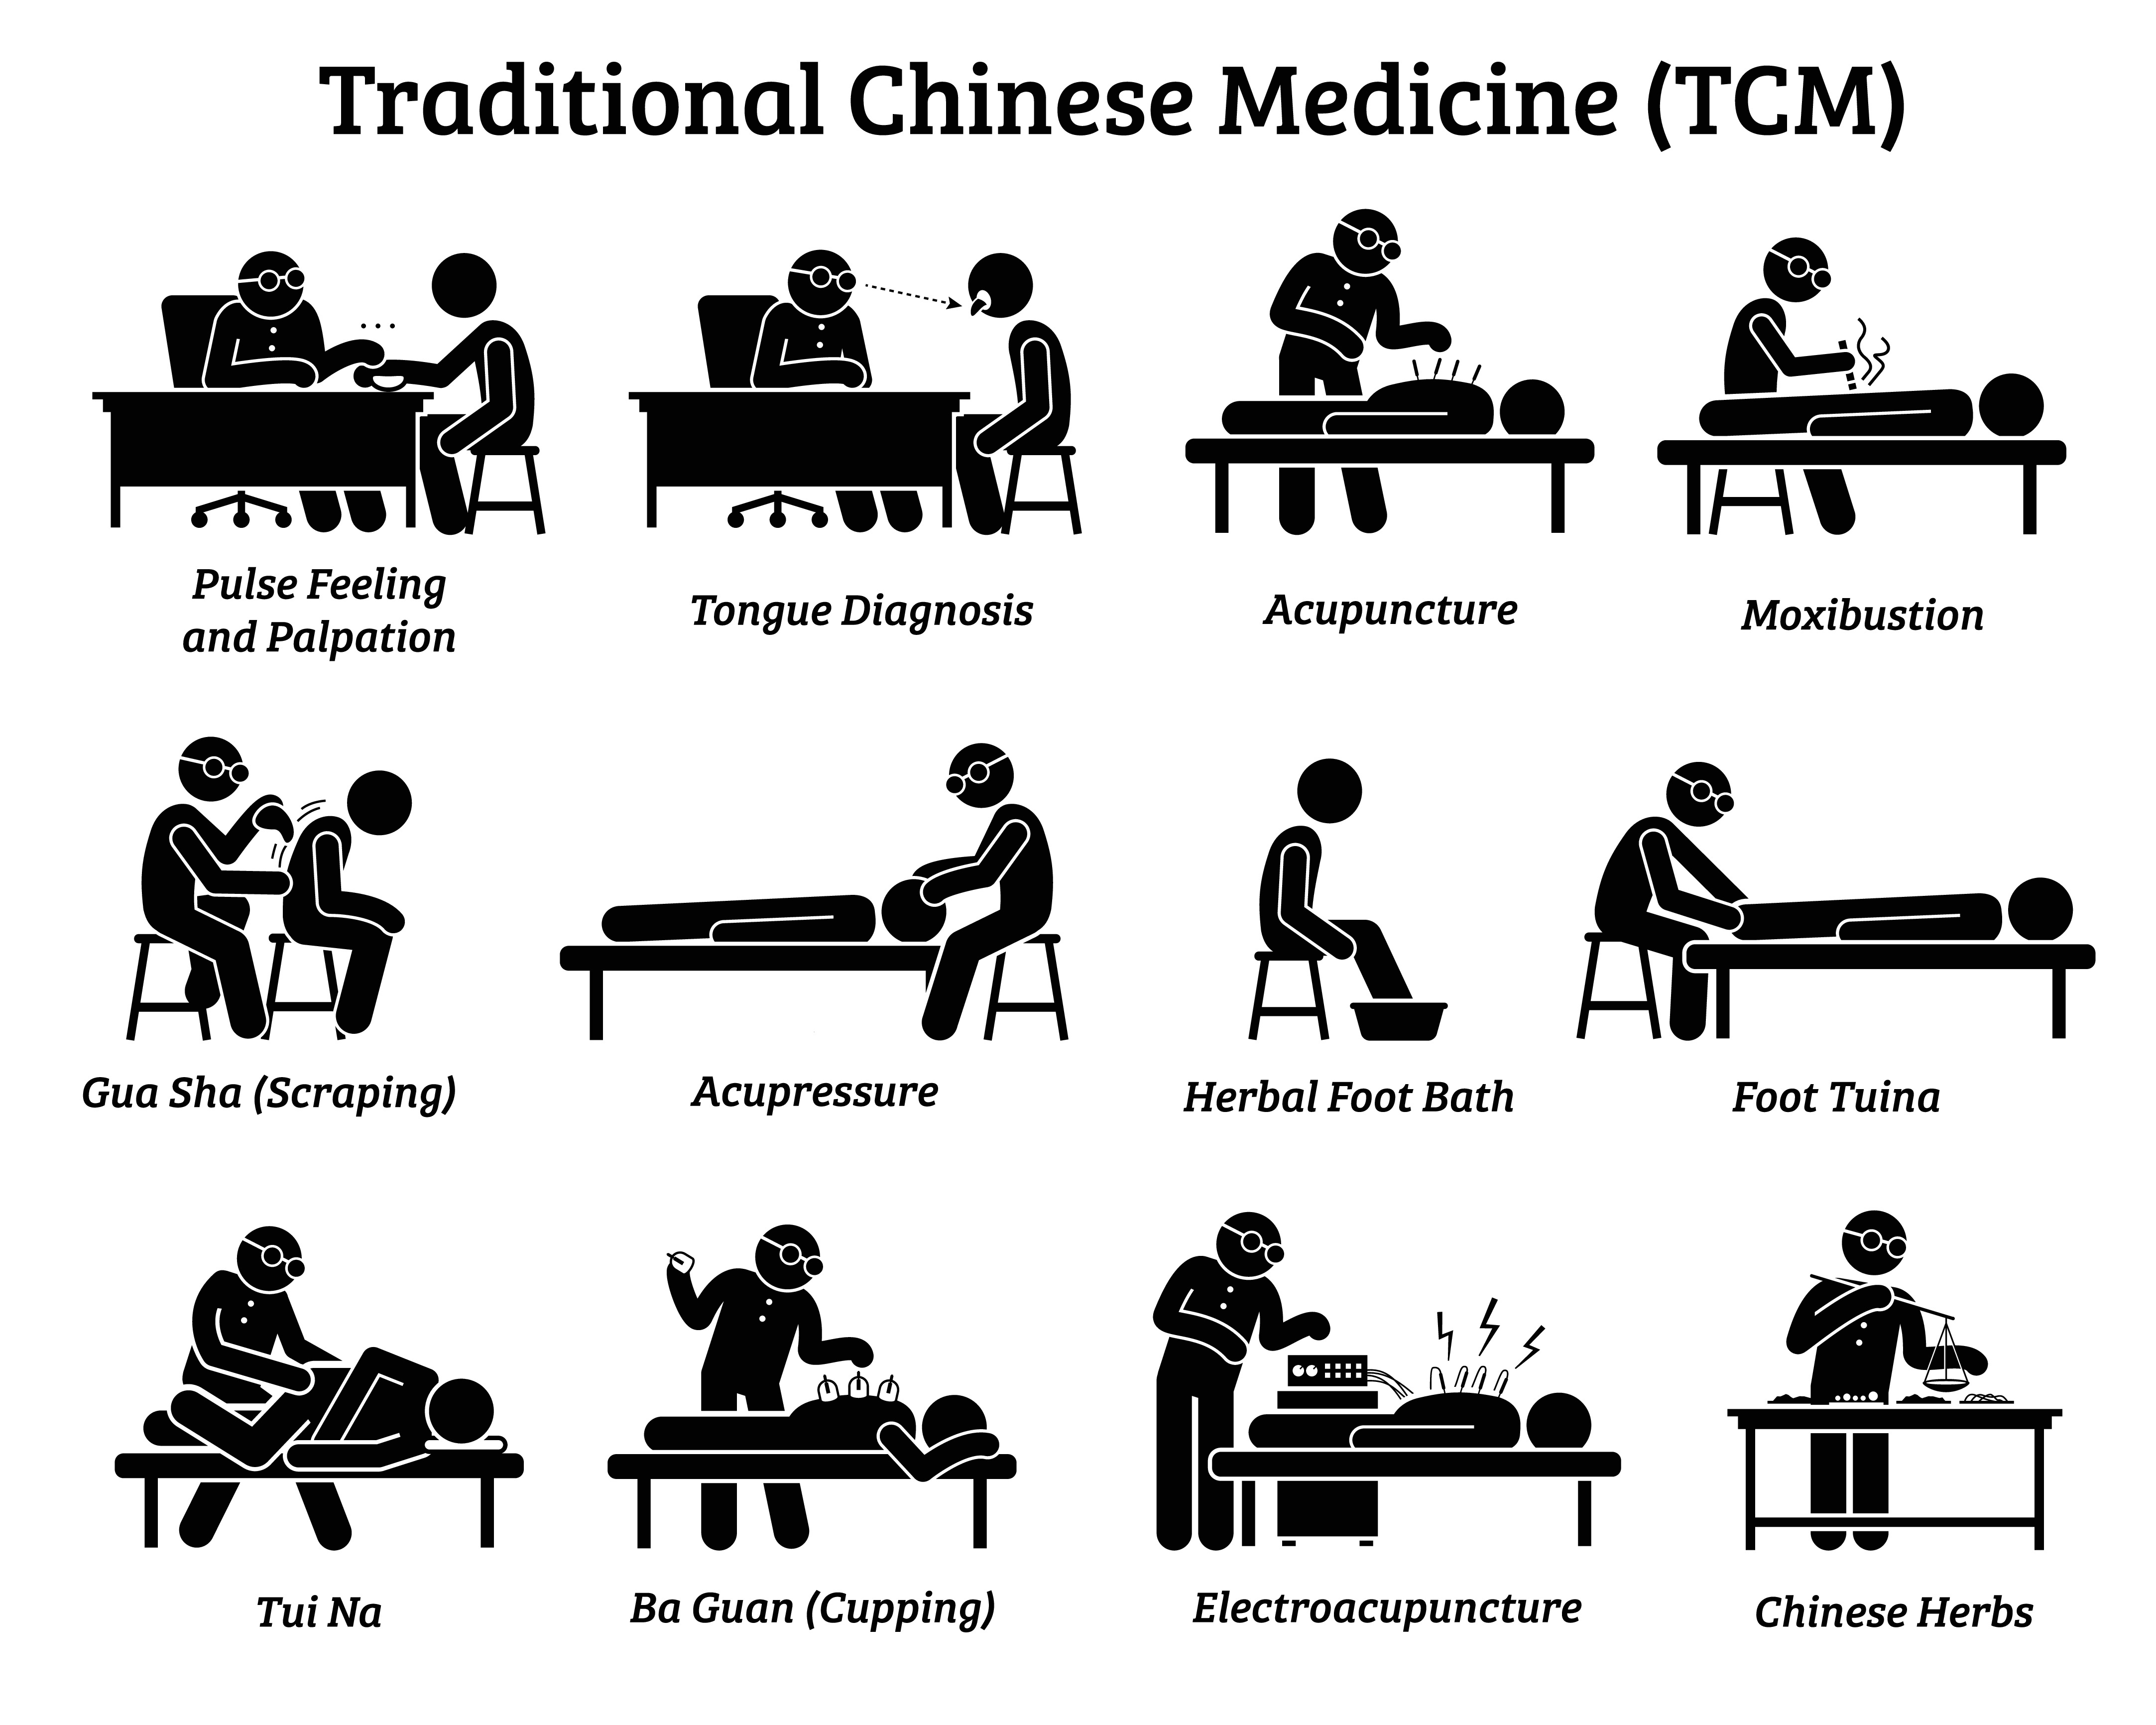 TCM Traditional Chinese Medicine Icons And Pictograms. Artworks Depict A TCM Doctor Practitioner Examining Patient, Feeling Pulse, Doing Acupuncture, Moxibustion, Massage, And Preparing Chinese Herbs.